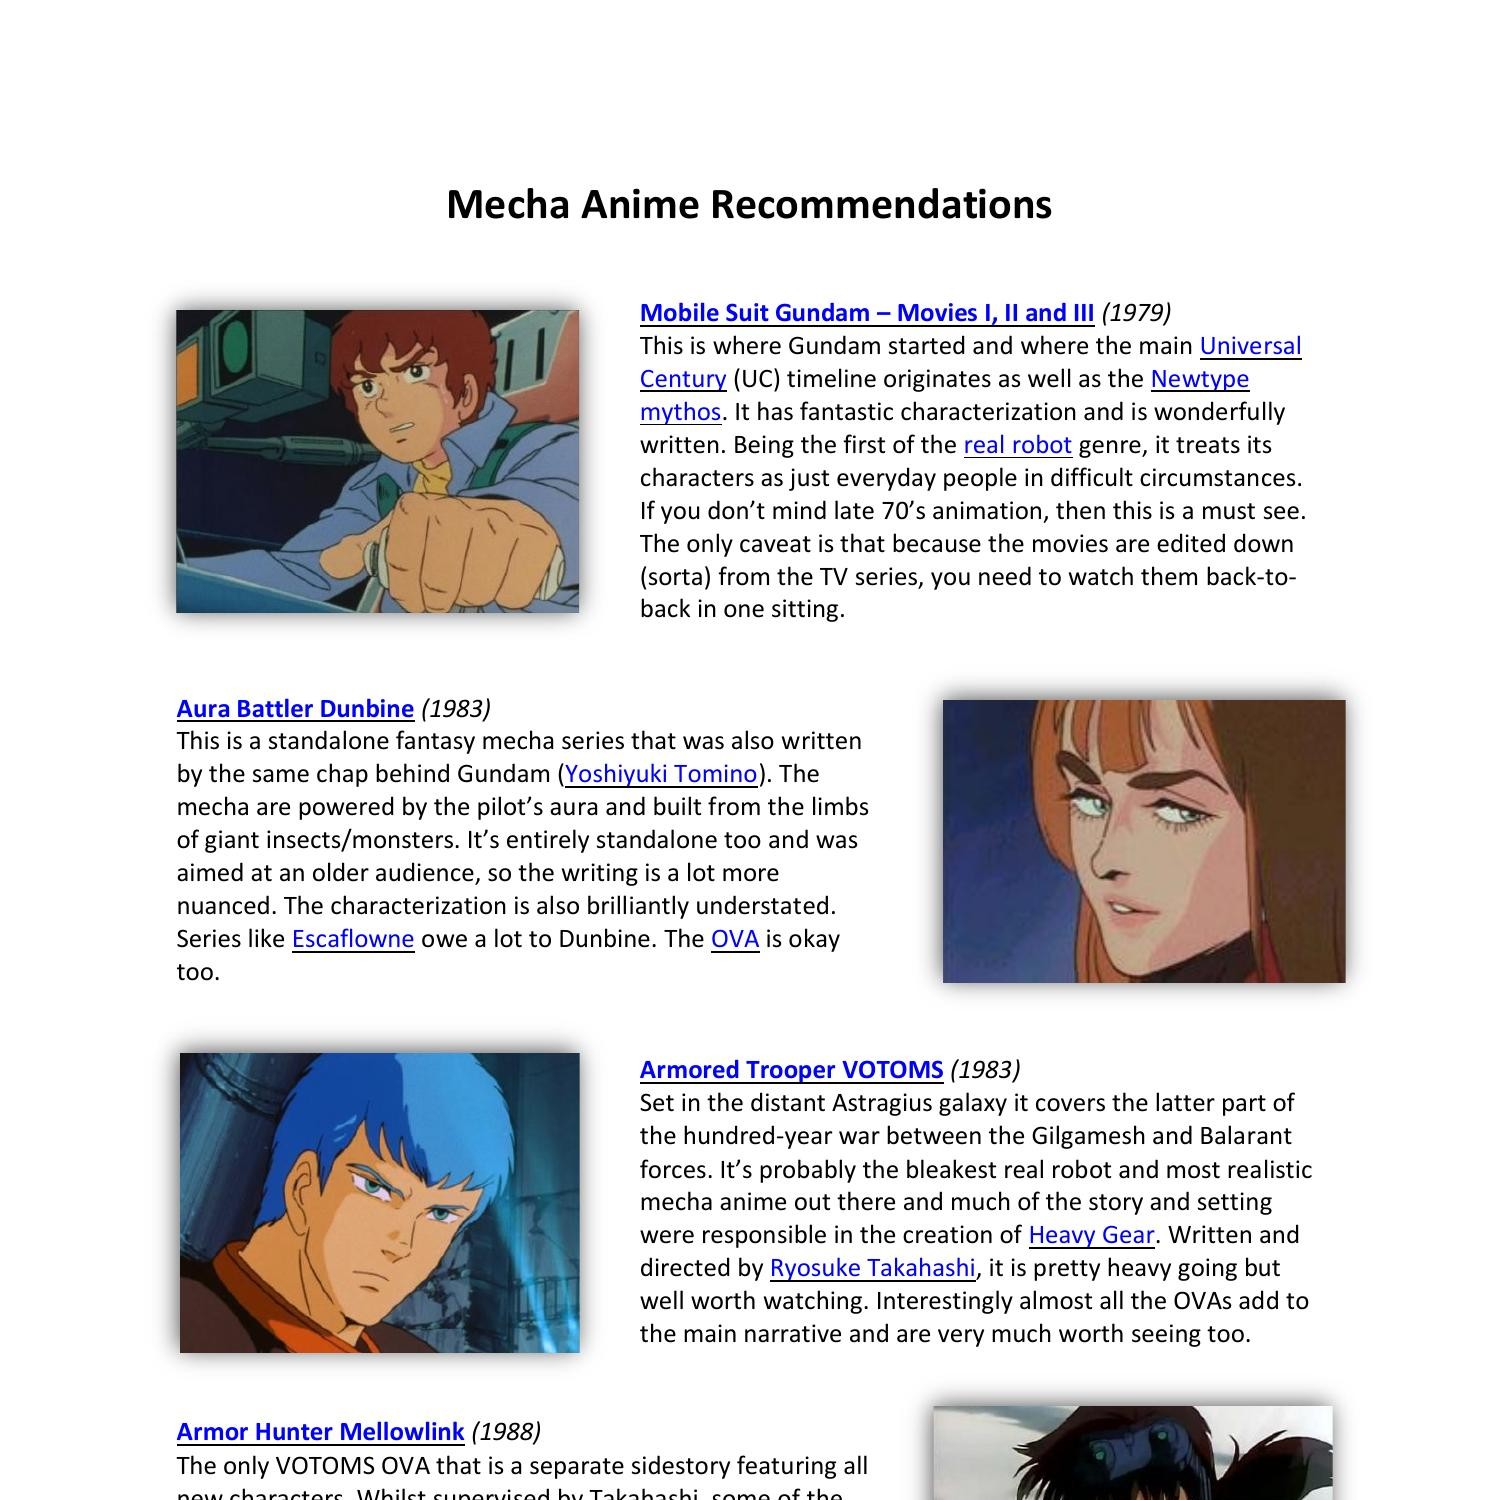 GitHub - jahnavish/sensai-anime-recommender: This is an anime recommendation  system made using Machine Learning Algorithms in Python and implemented  through a responsive website using Flask, HTML, CSS, JavaScript and JQuery.